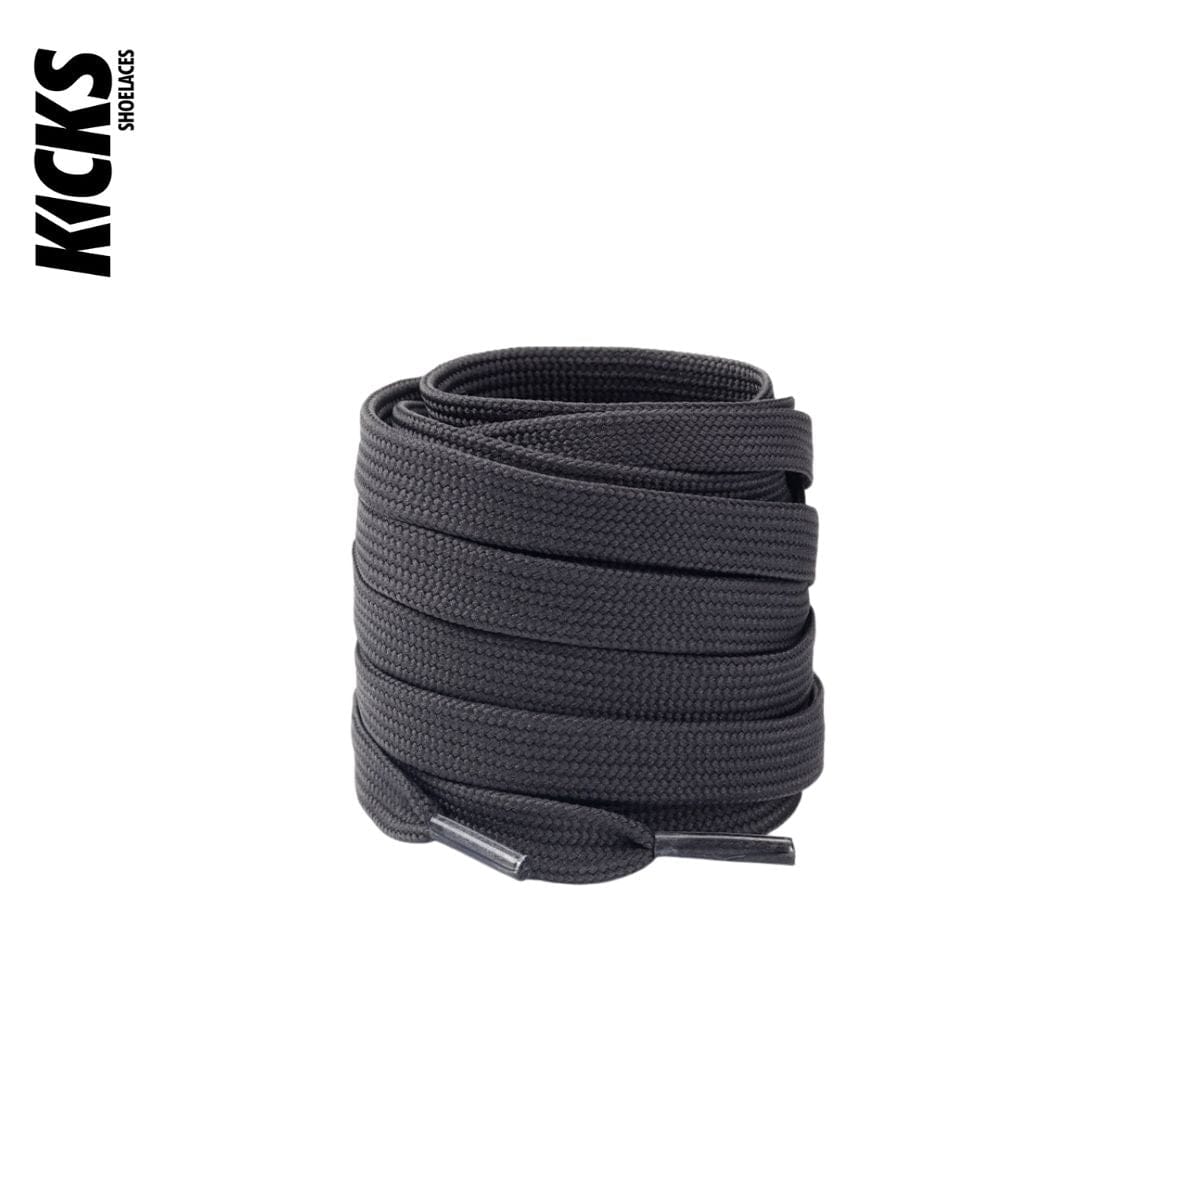 Dark Grey Replacement Shoe Laces for Adidas NMD Sneakers by Kicks Shoelaces